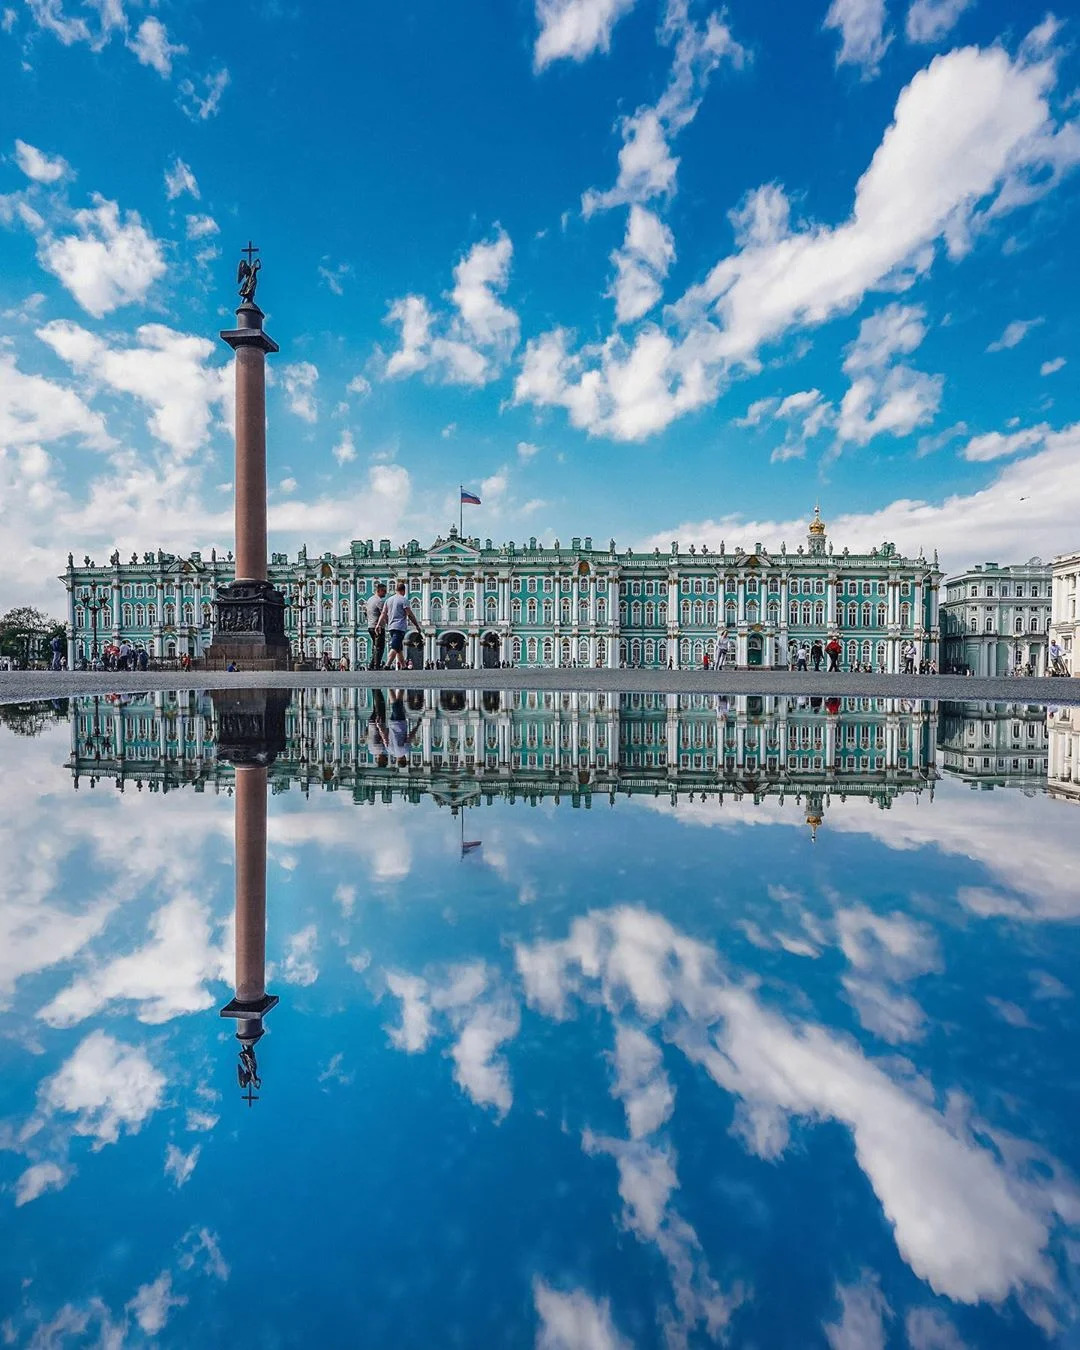 St. Petersburg in the reflections